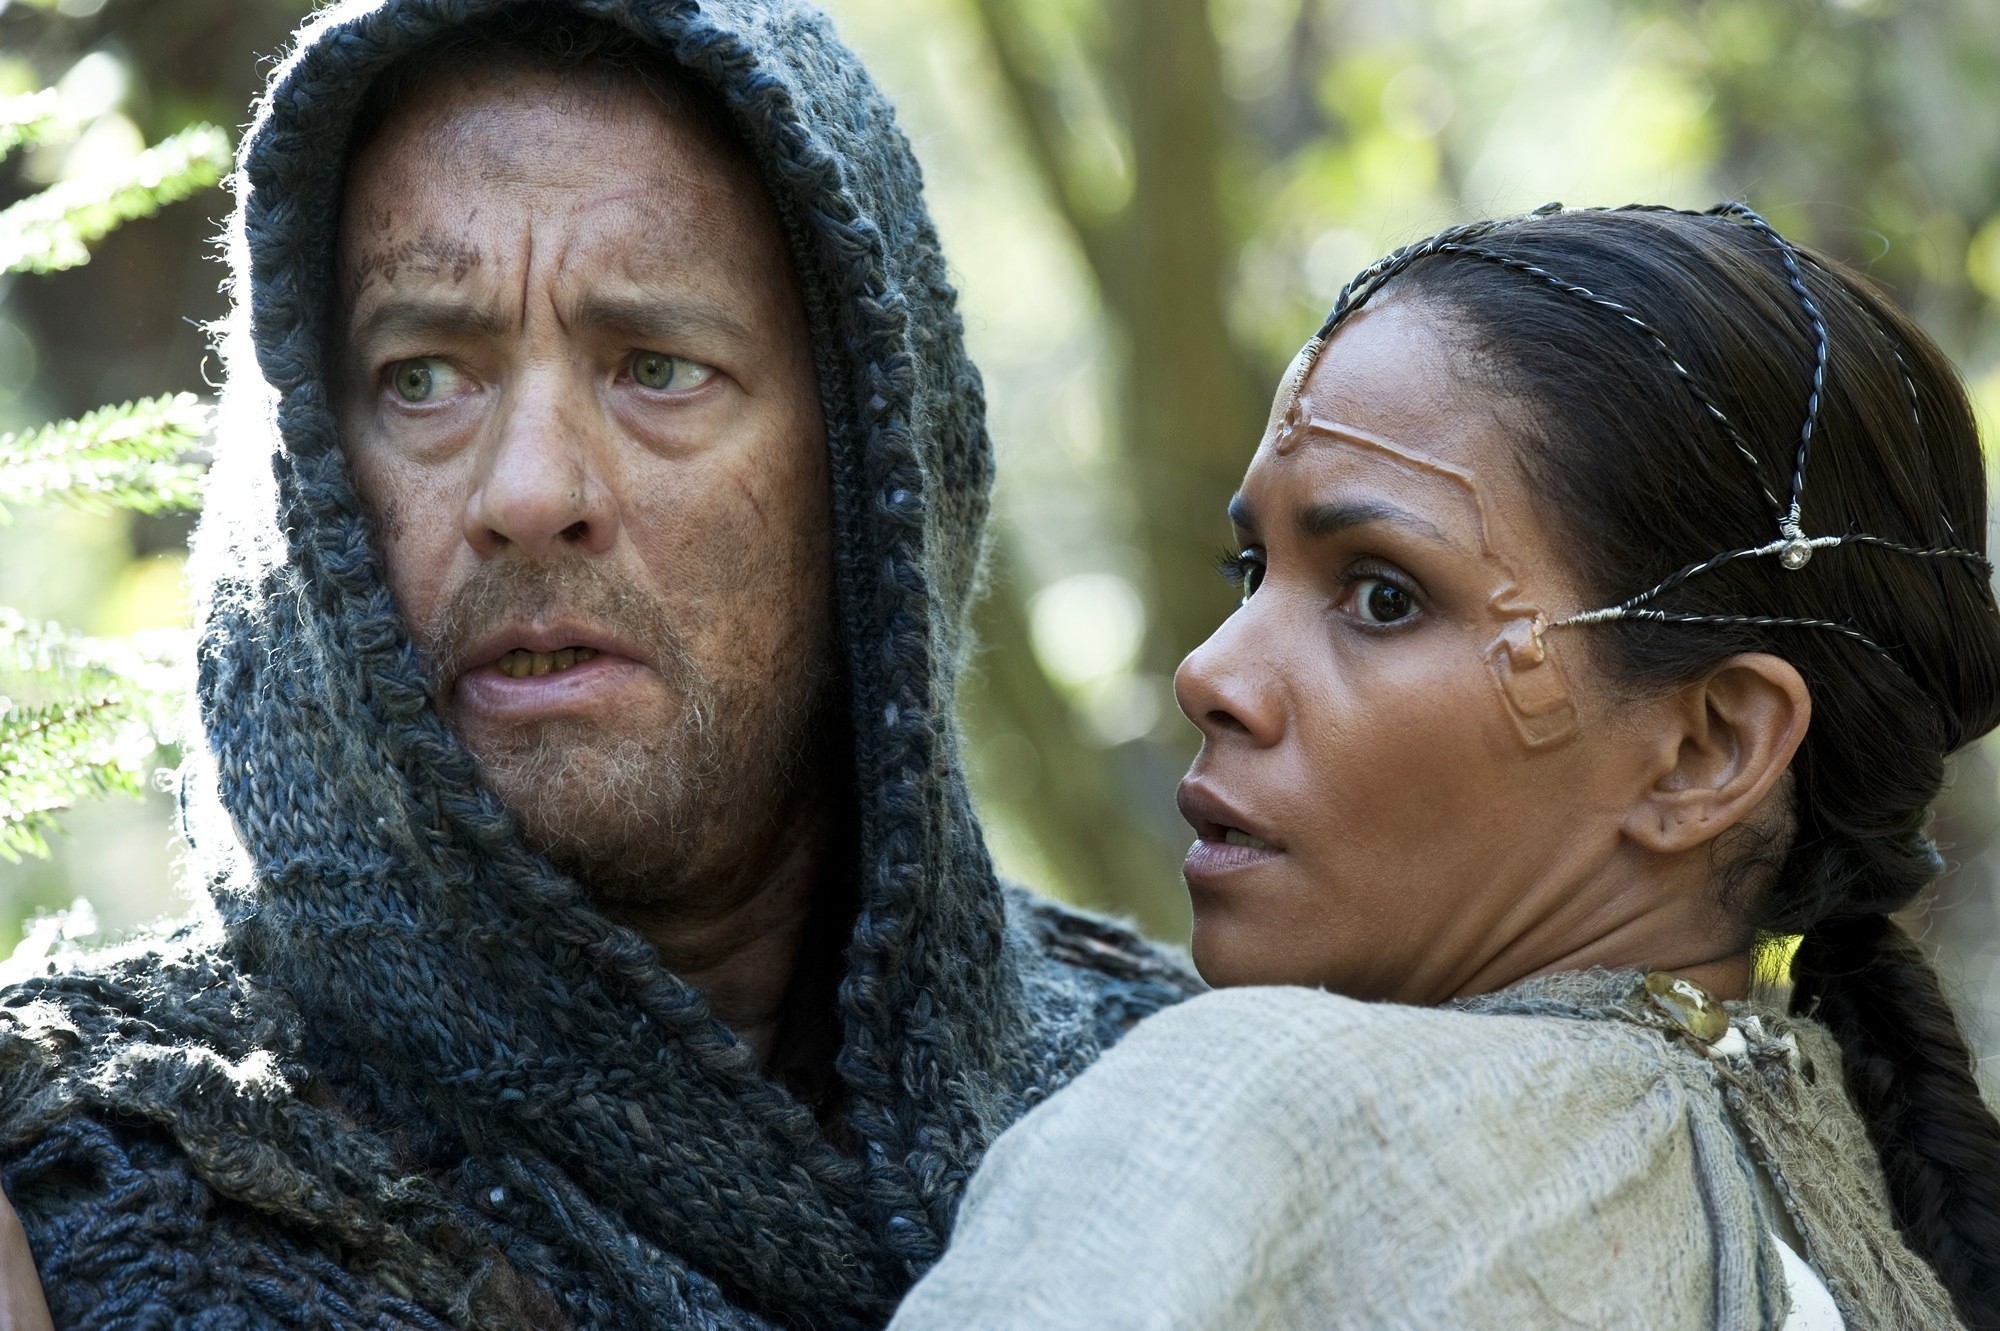 Tom Hanks stars as Valleysman Zachry and Halle Berry stars as Meronym in Warner Bros. Pictures' Cloud Atlas (2012)